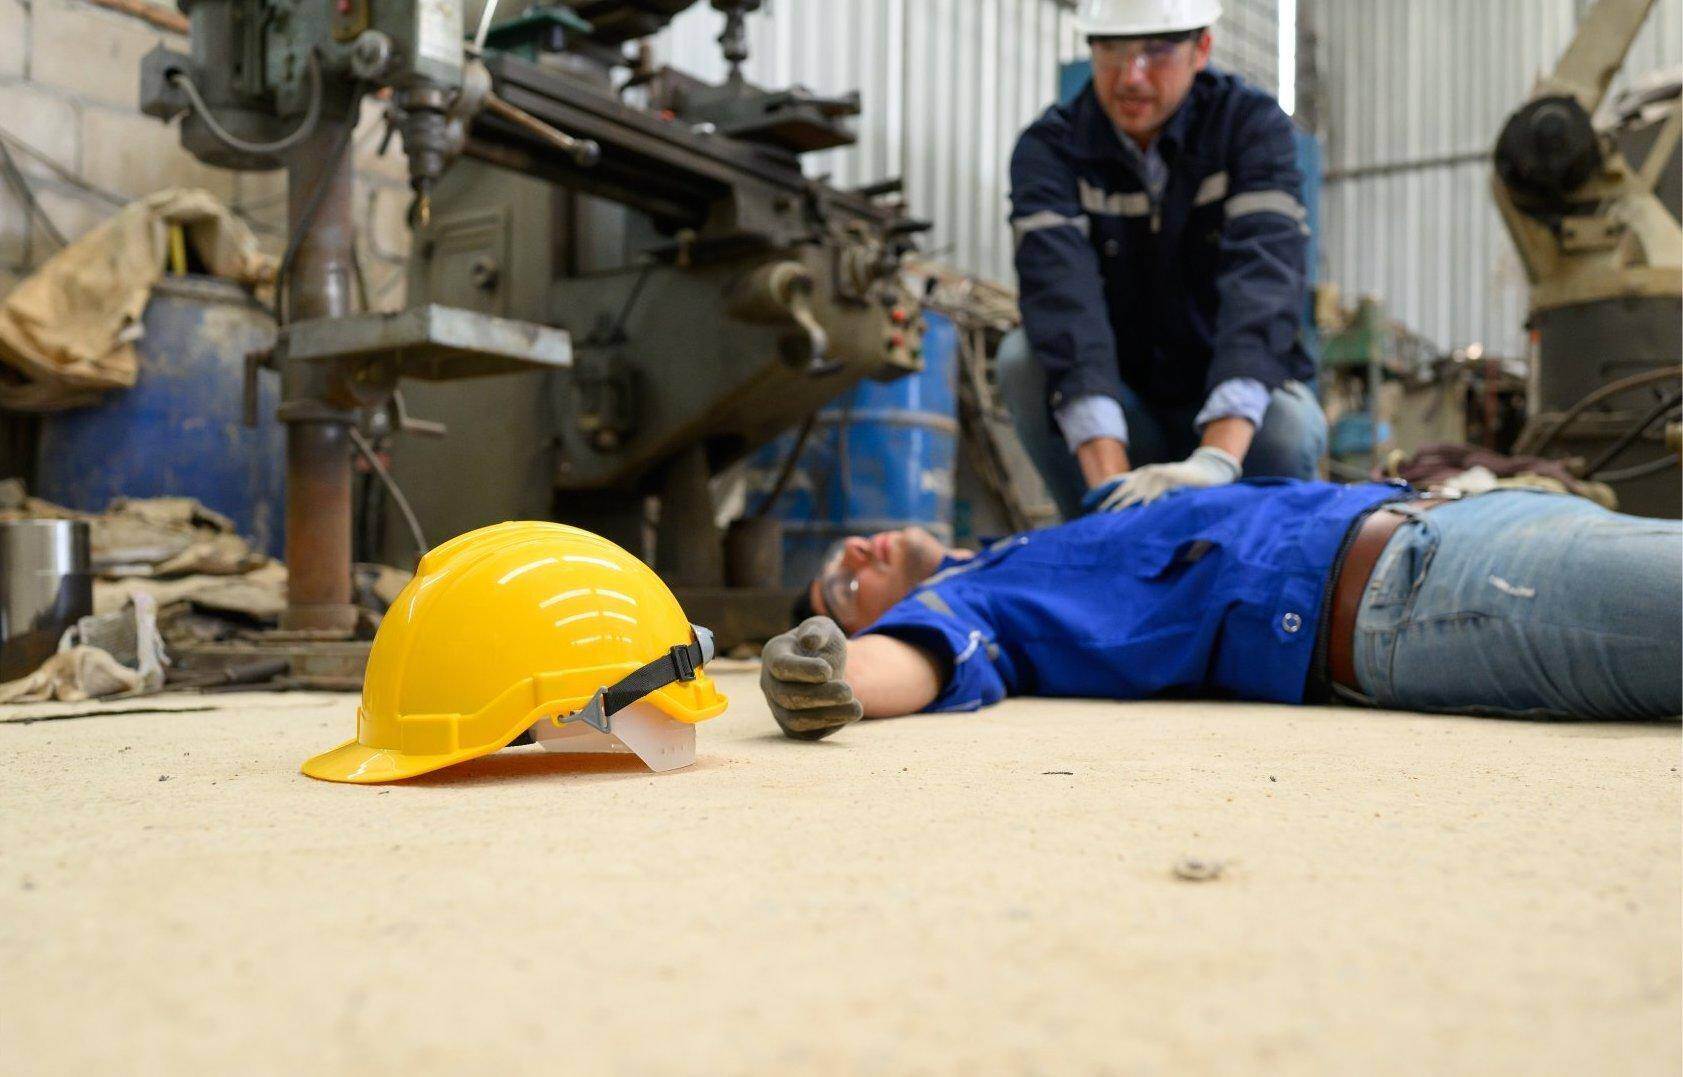 An unconscious man who has been injured on the job who will file for workers compensation in Rome, Georgia